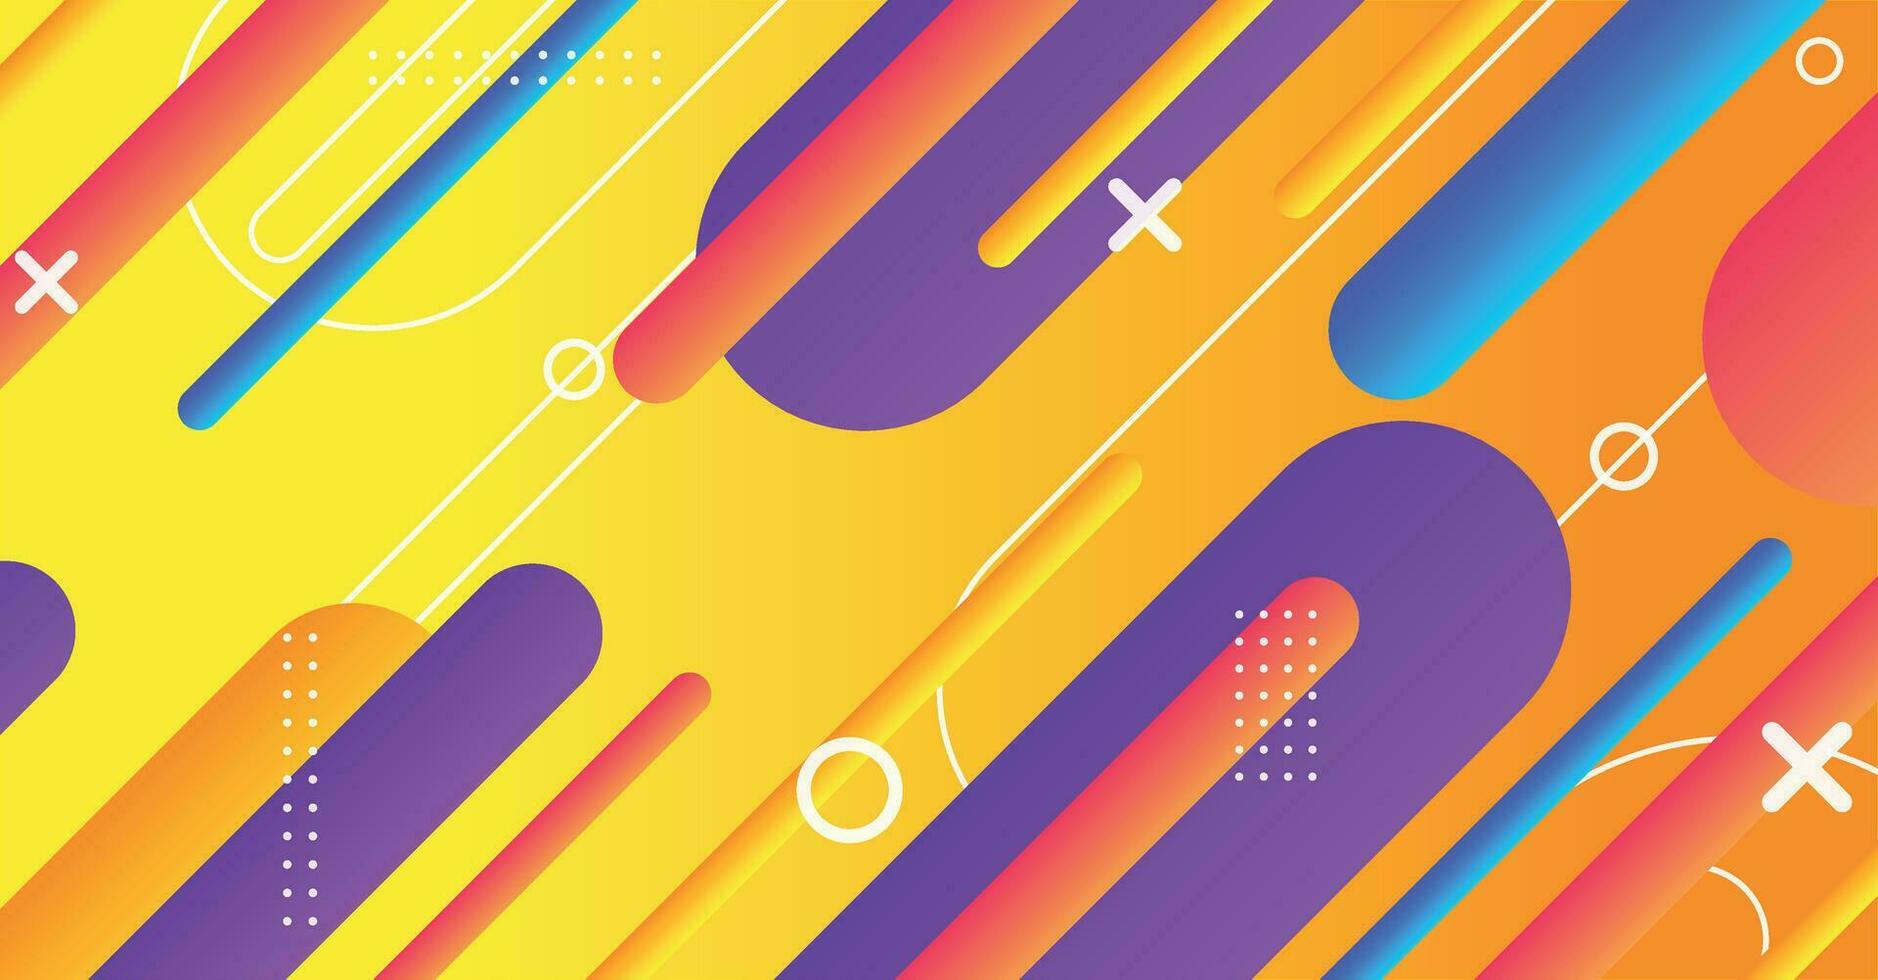 Abstract minimal geometric shape background with gradient vector